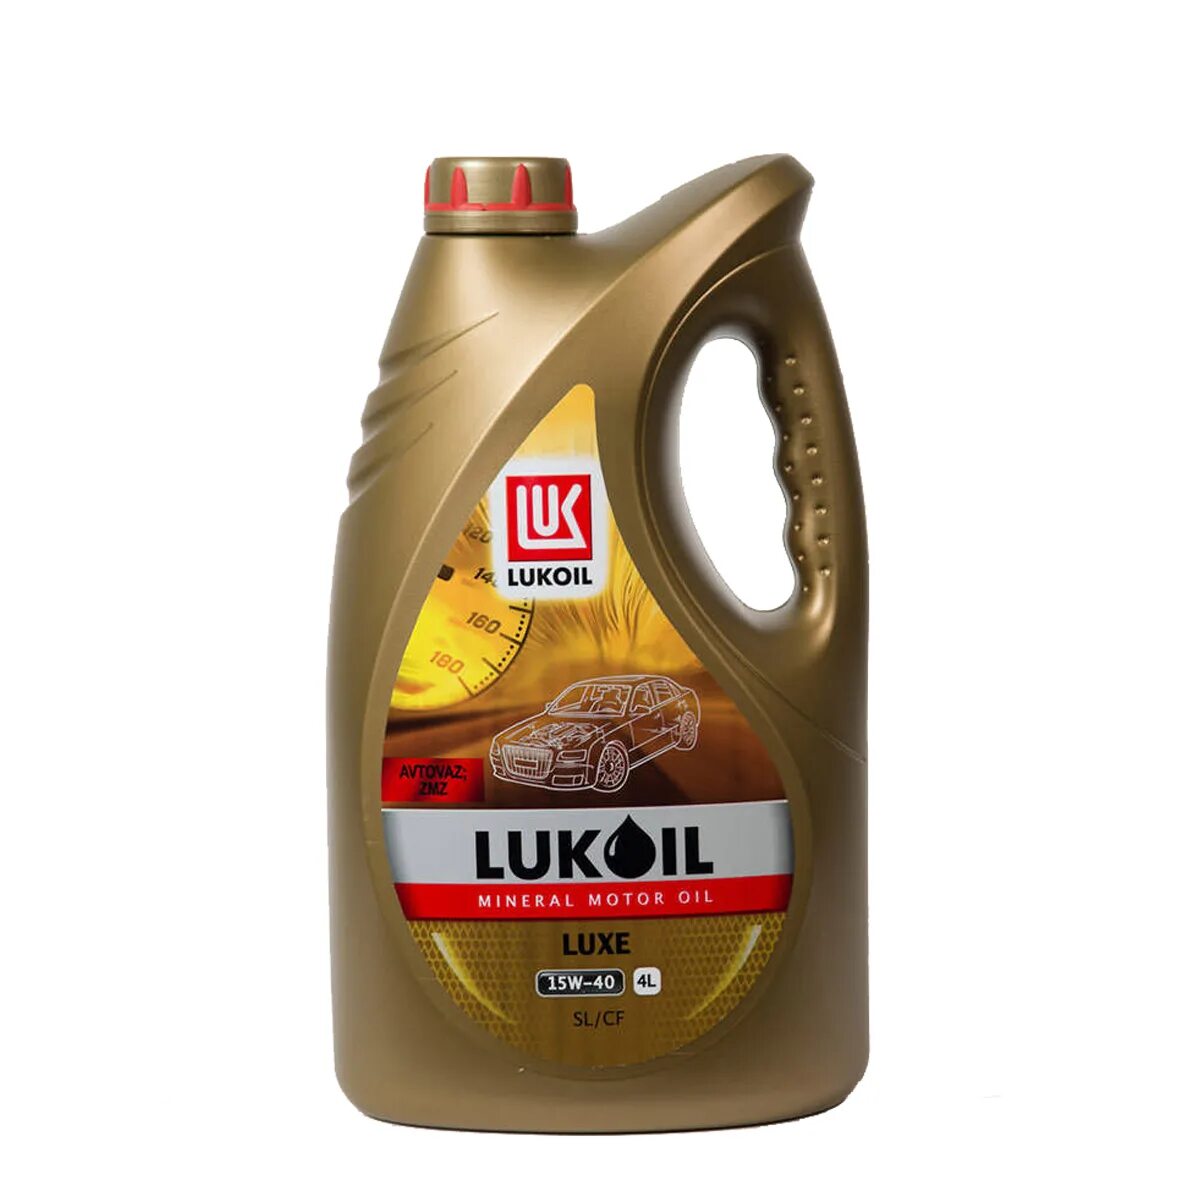 Lukoil Luxe 15w-40. Лукойл Люкс 10w30. Lukoil. Sae15w40. Масло Luxe 15w40 минеральное. Лукойл api sn